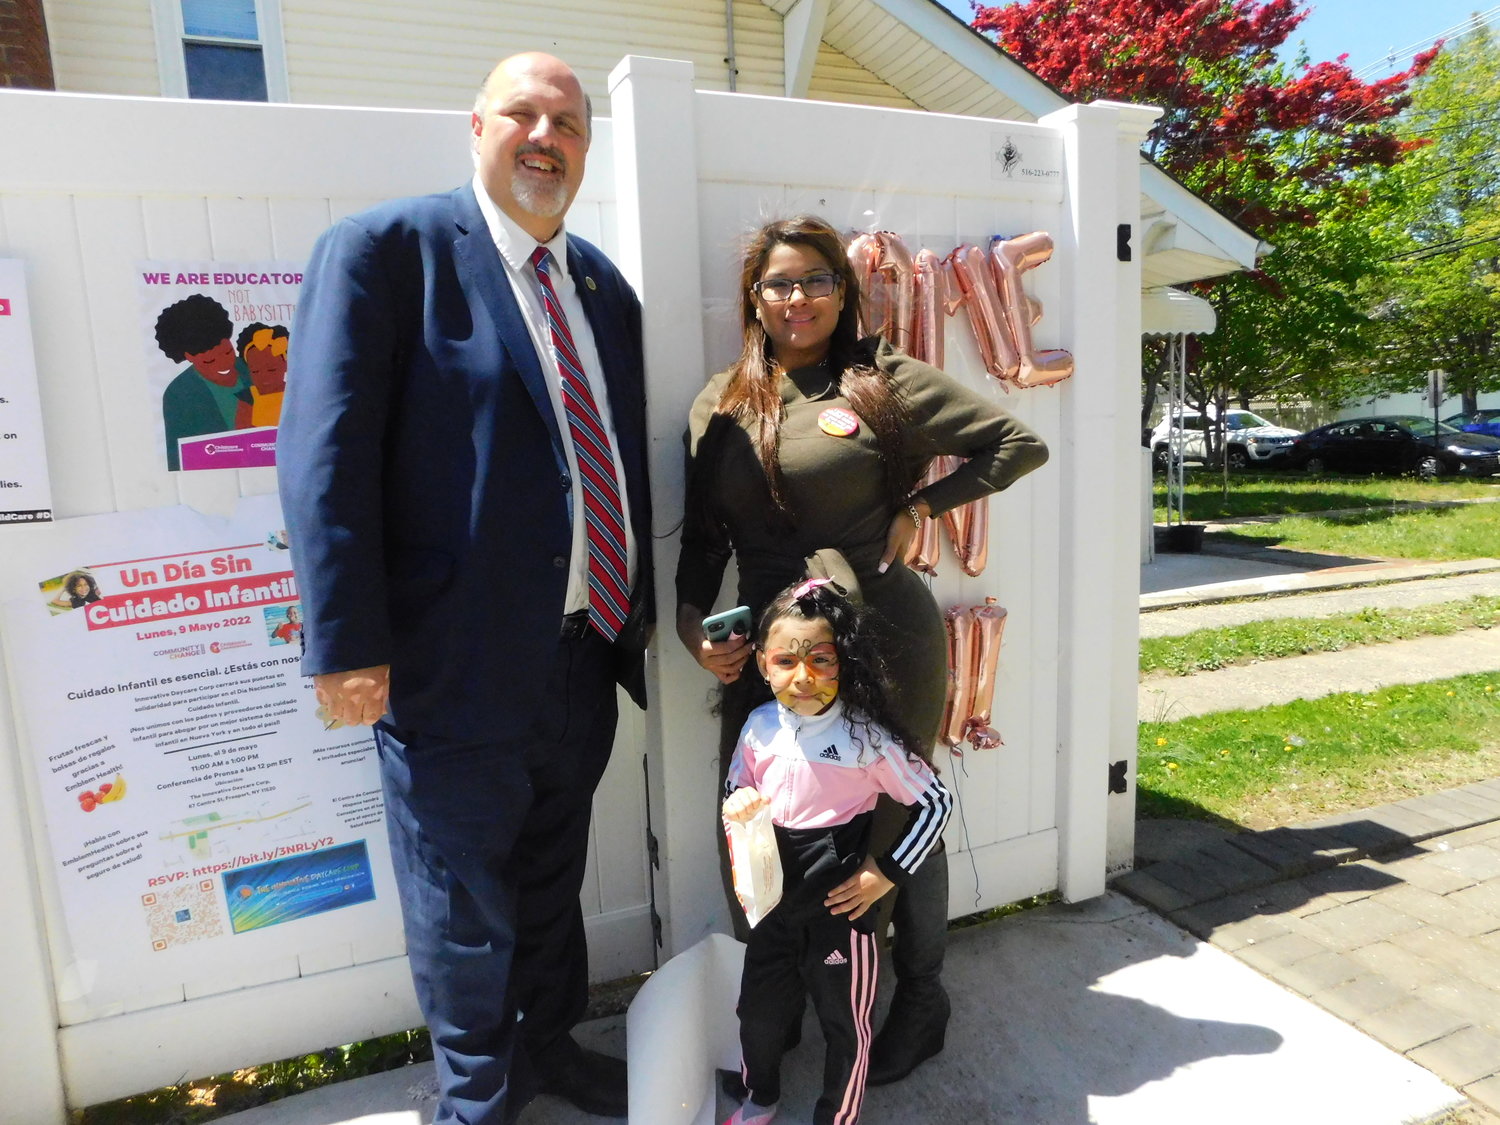 Joseph Galante, assistant state comptroller, came to support Janna Rodriguez, shown here with 4-year-old Esther ‘Jay-Lo’ Morales, who attends Innovative Daycare.